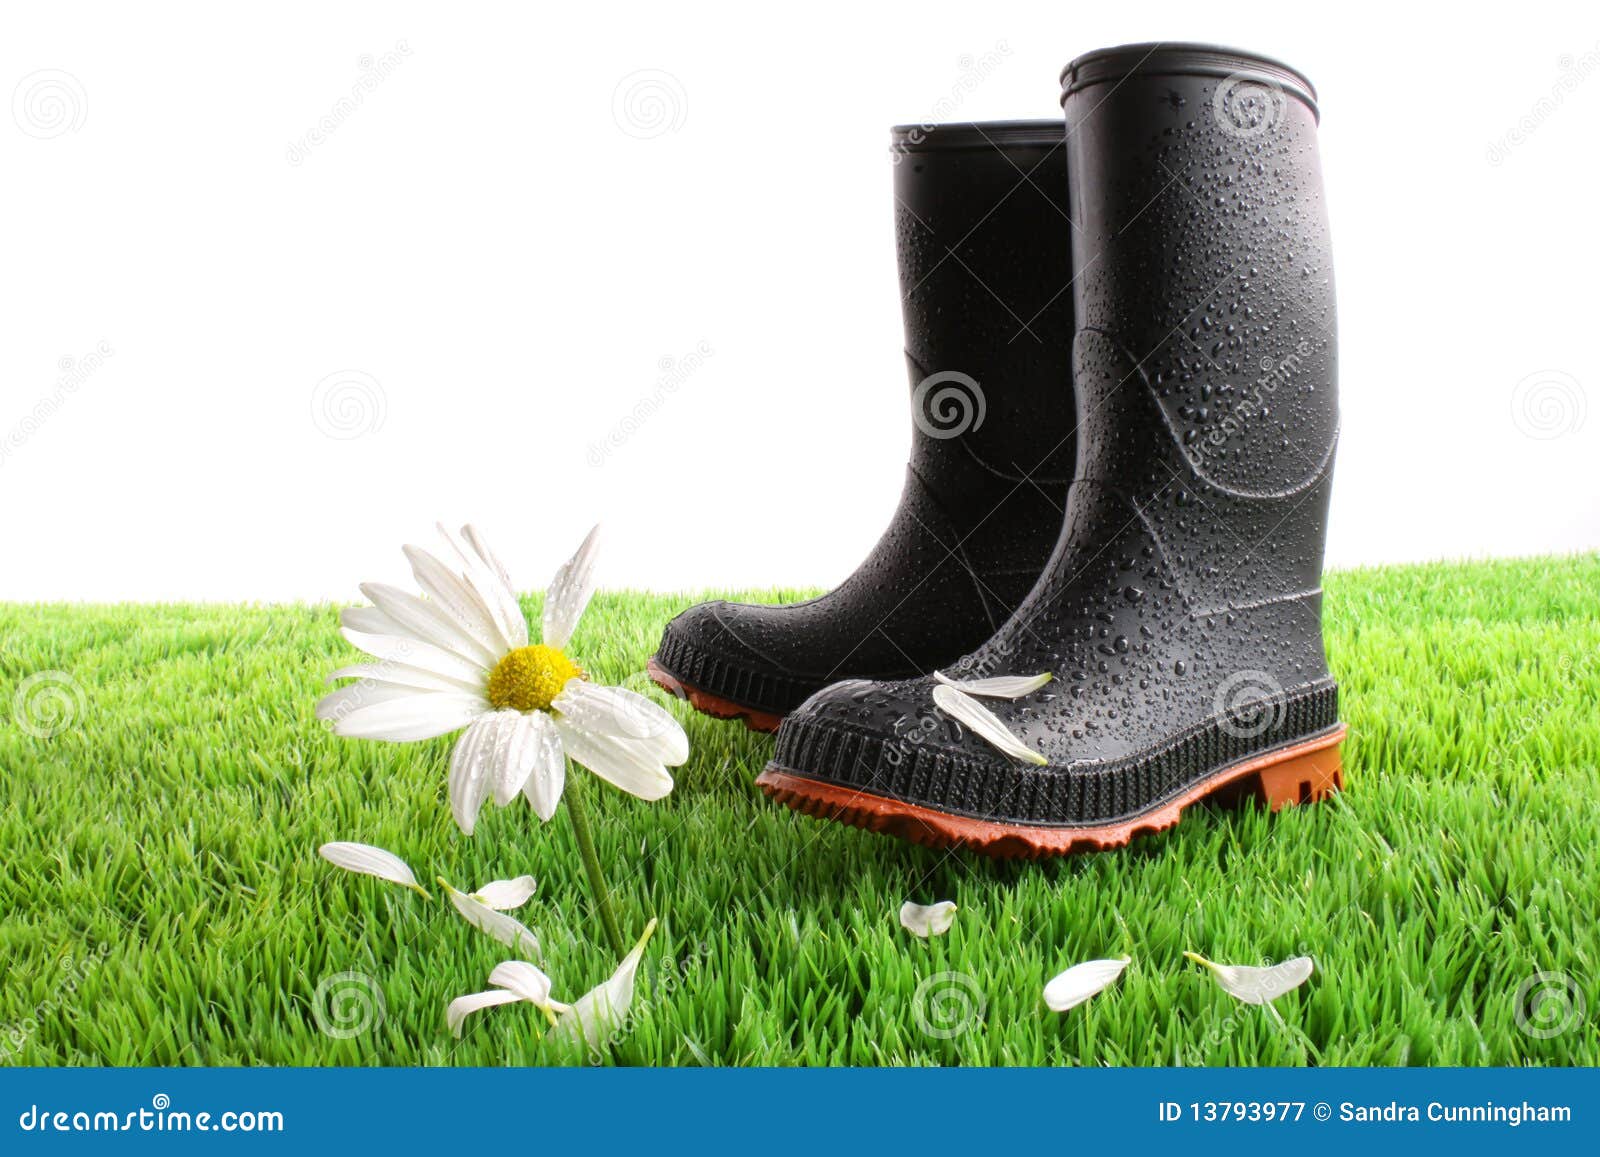 Rubber Boots with Daisy in Grass Stock Image - Image of cultivated ...